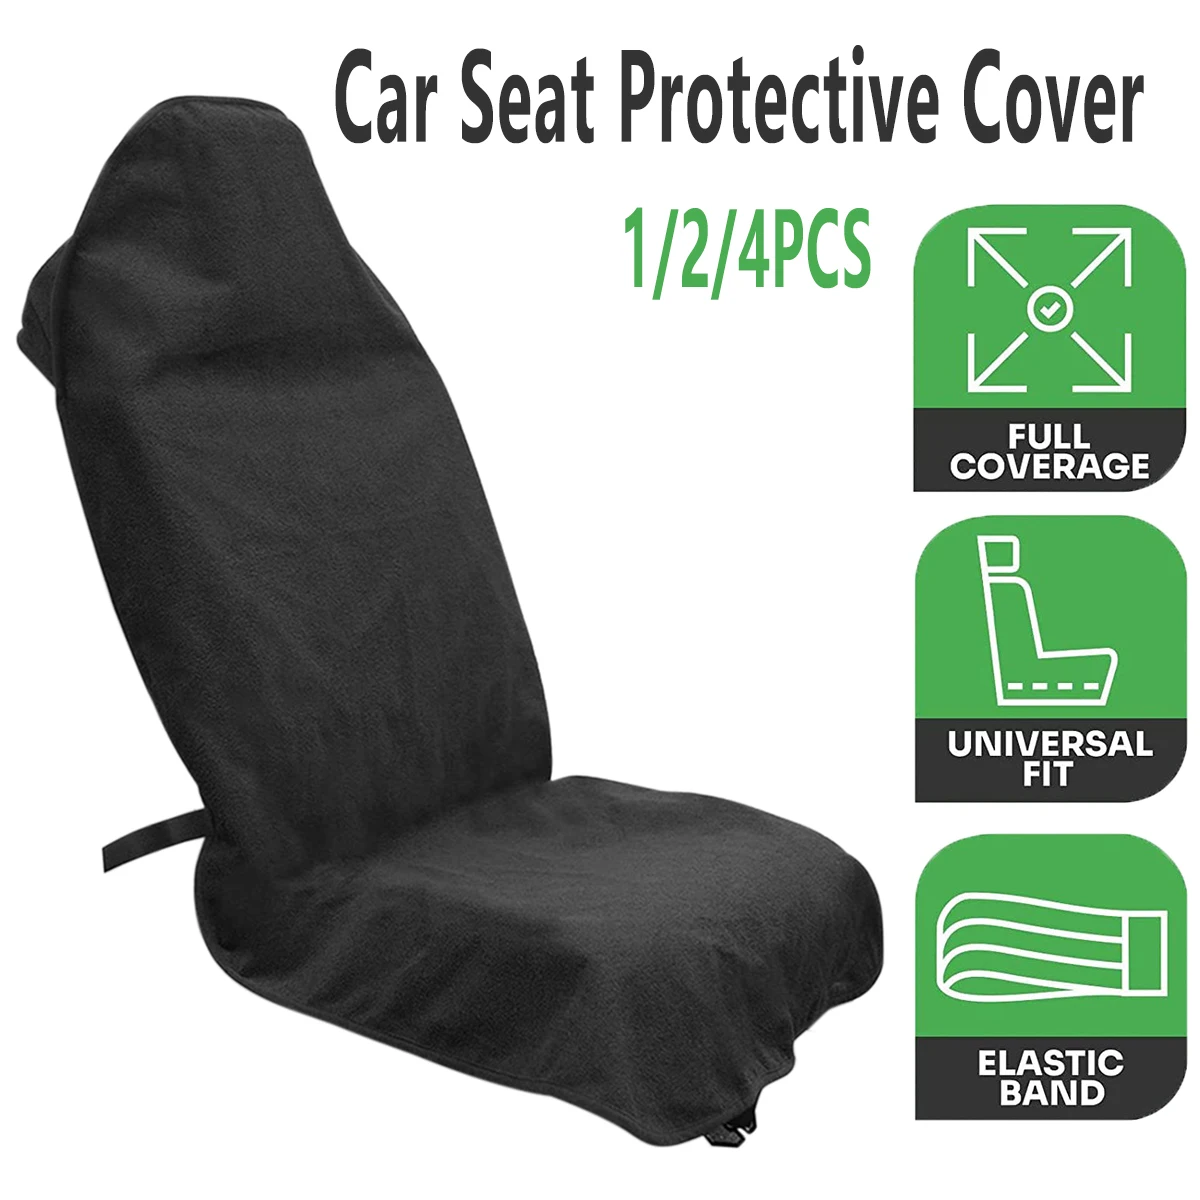 Protective cover antifouling car seat towel protector with adjustable elastic strap non thumb200